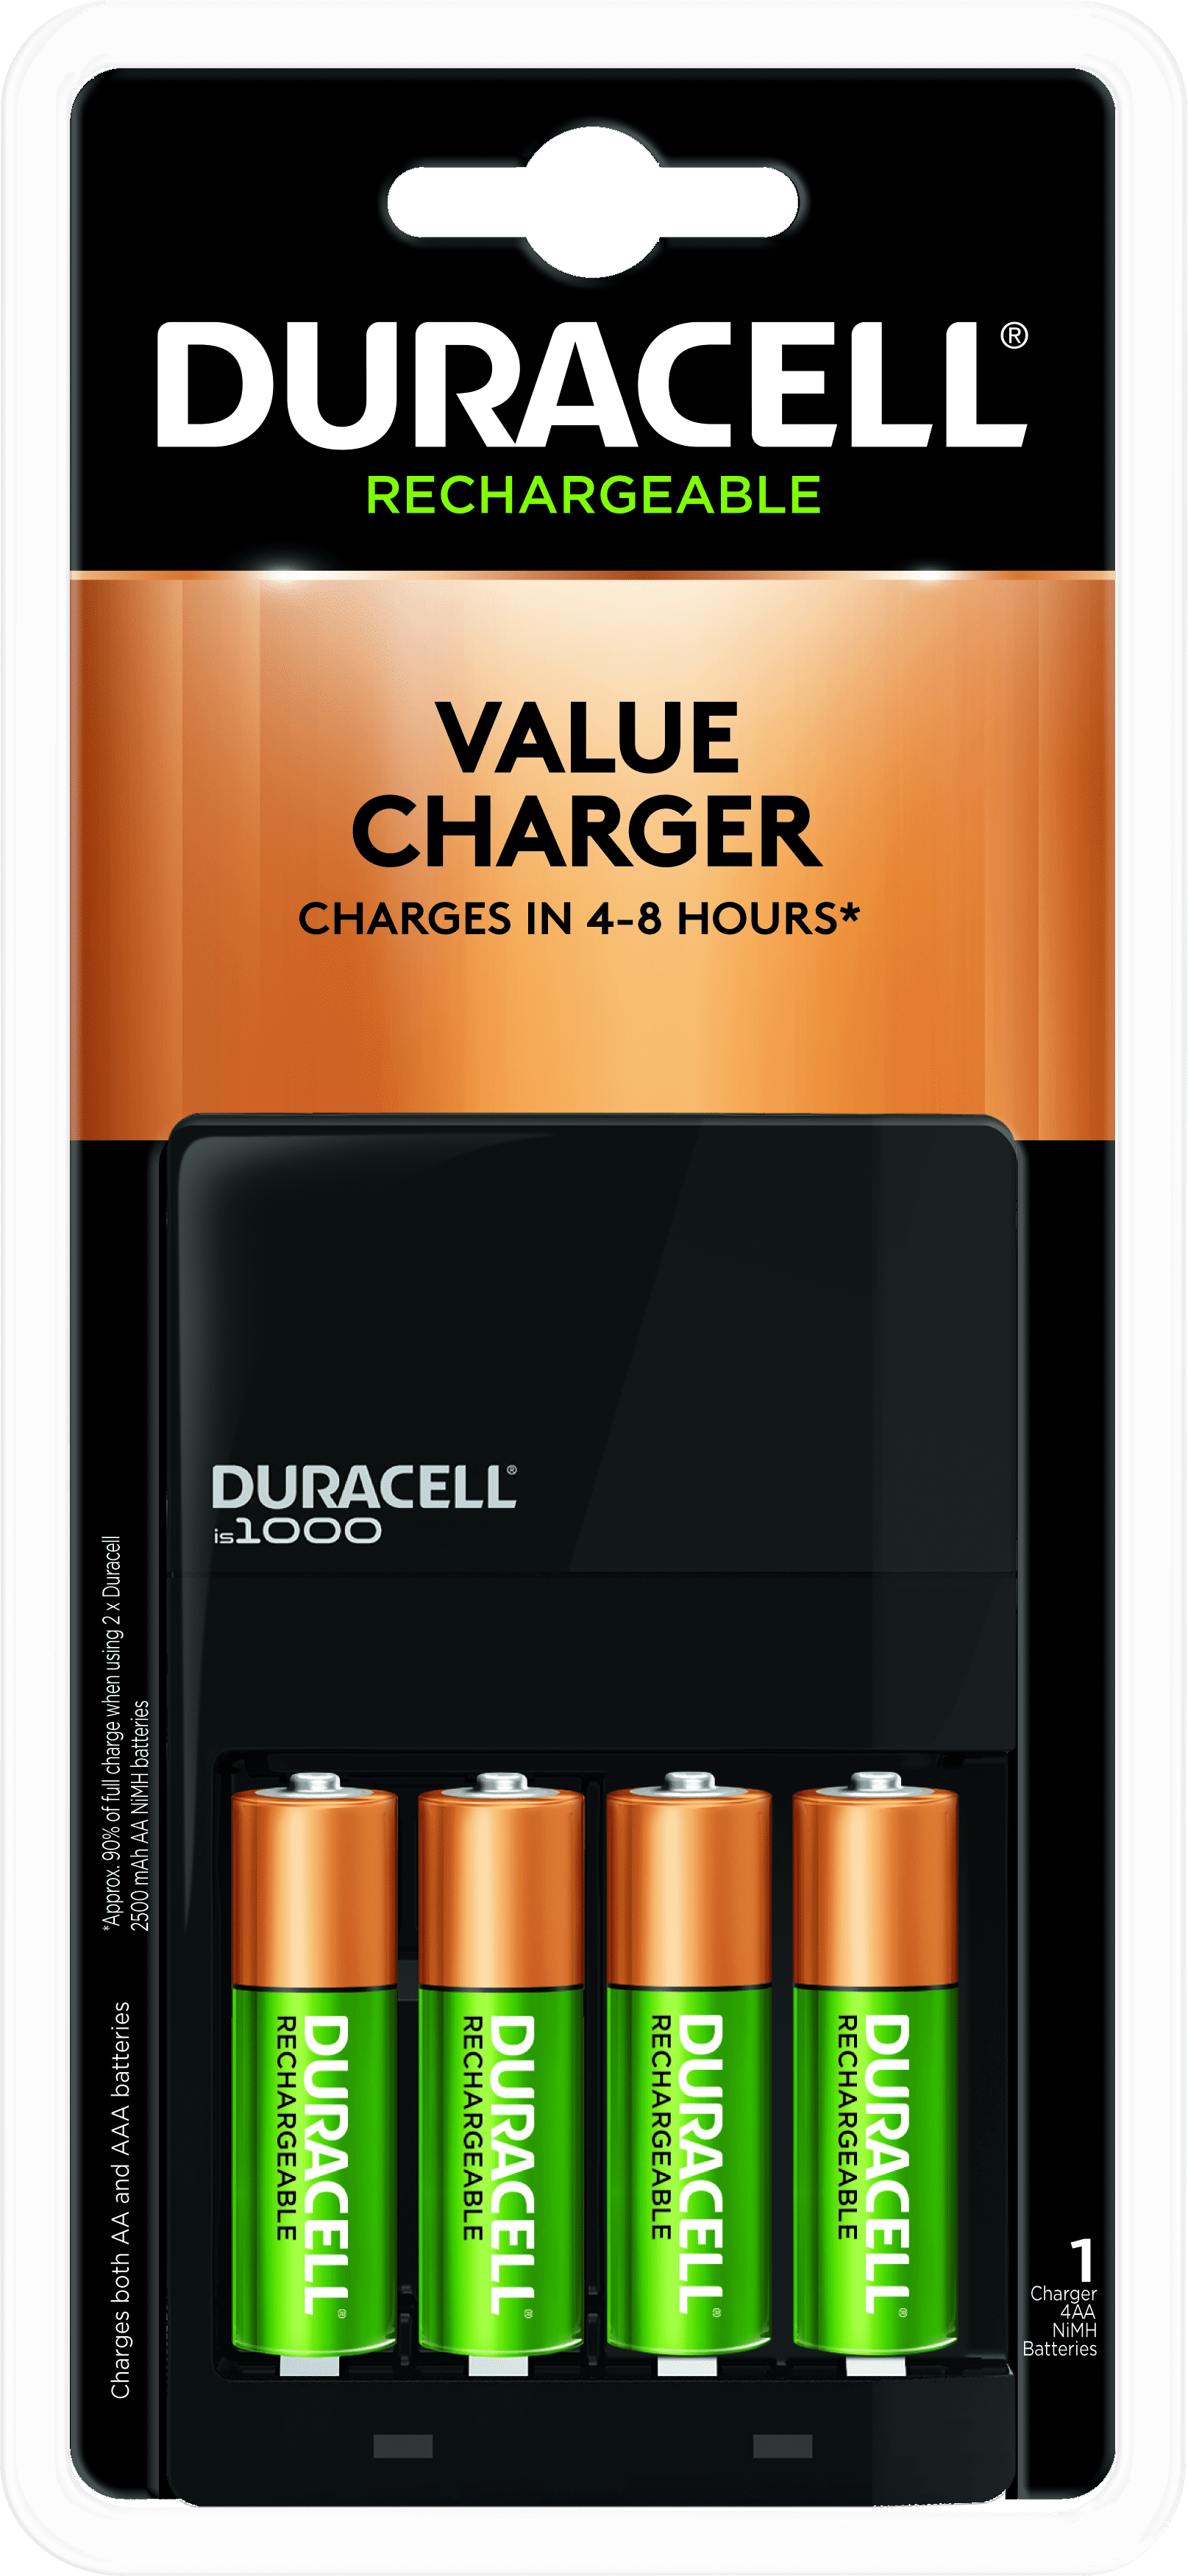 duracell-ion-speed-1000-rechargeable-battery-charger-includes-4-aa